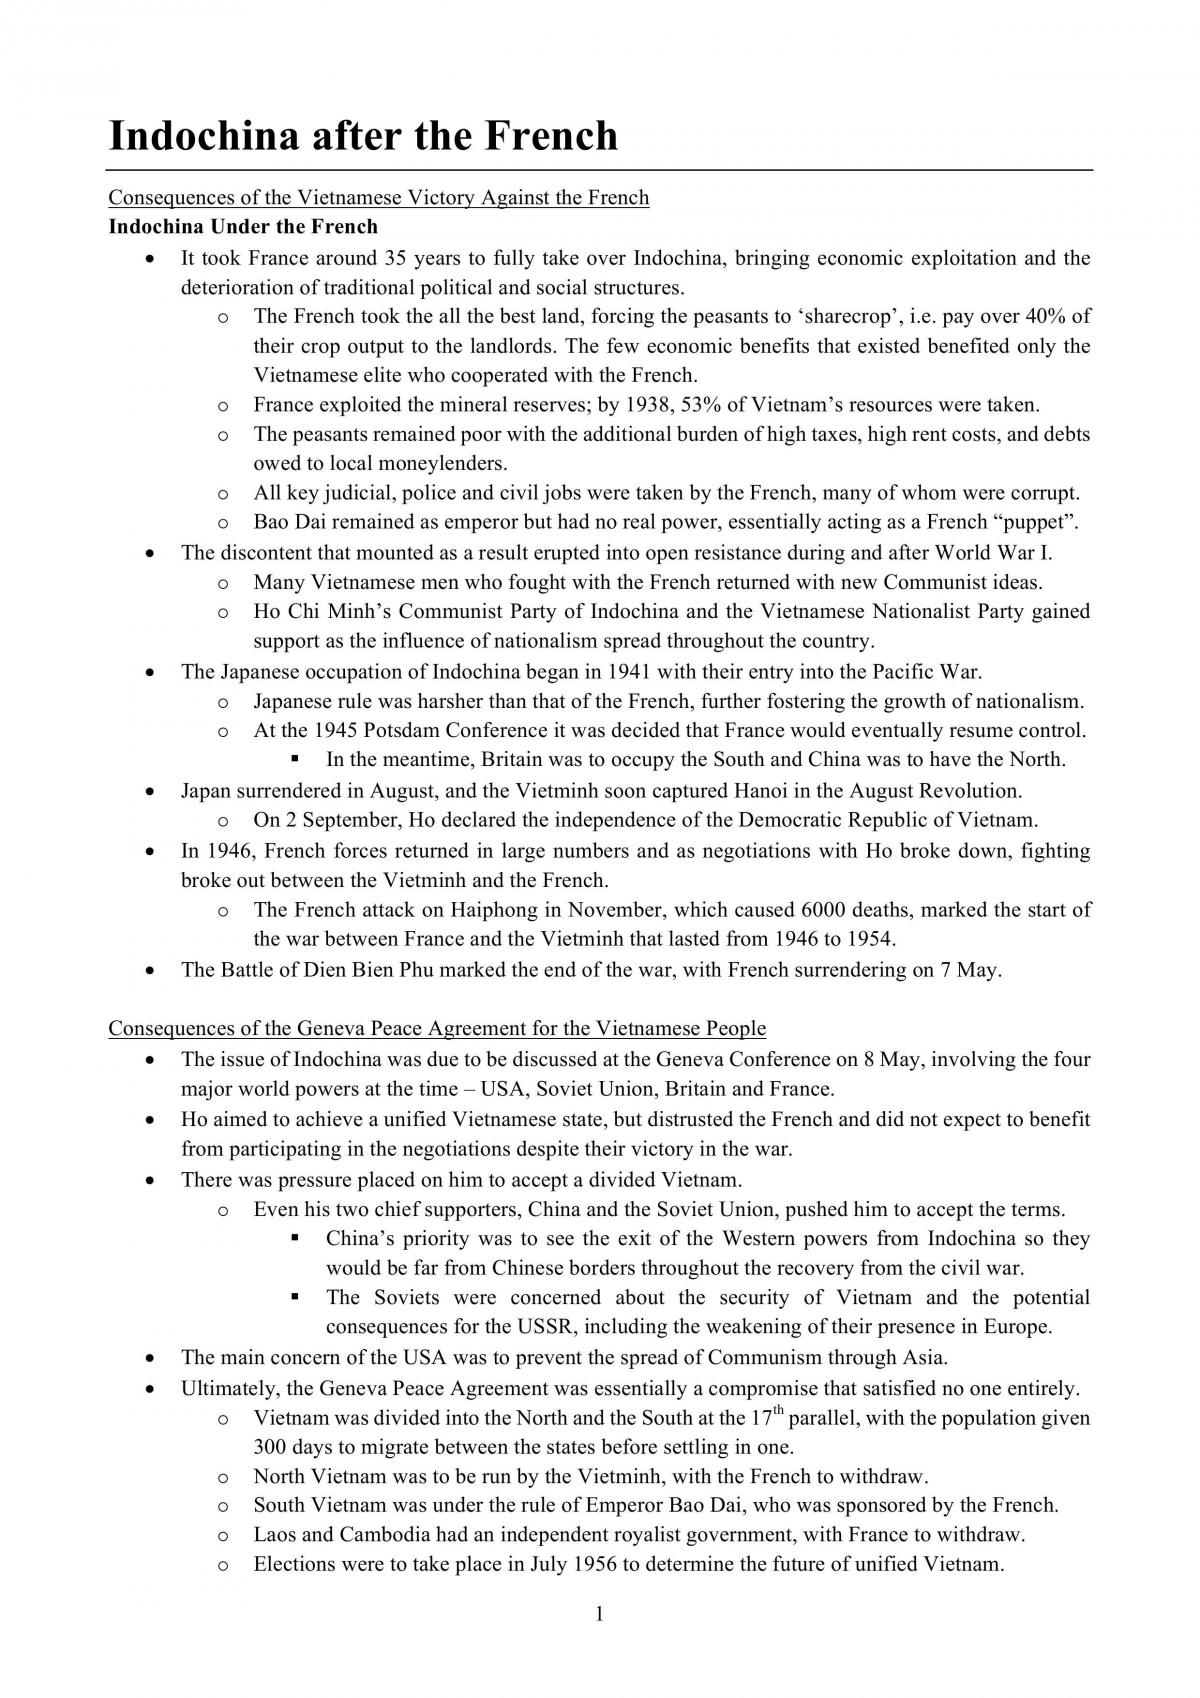 Peace and Conflict: Indochina Topic Notes - Page 1